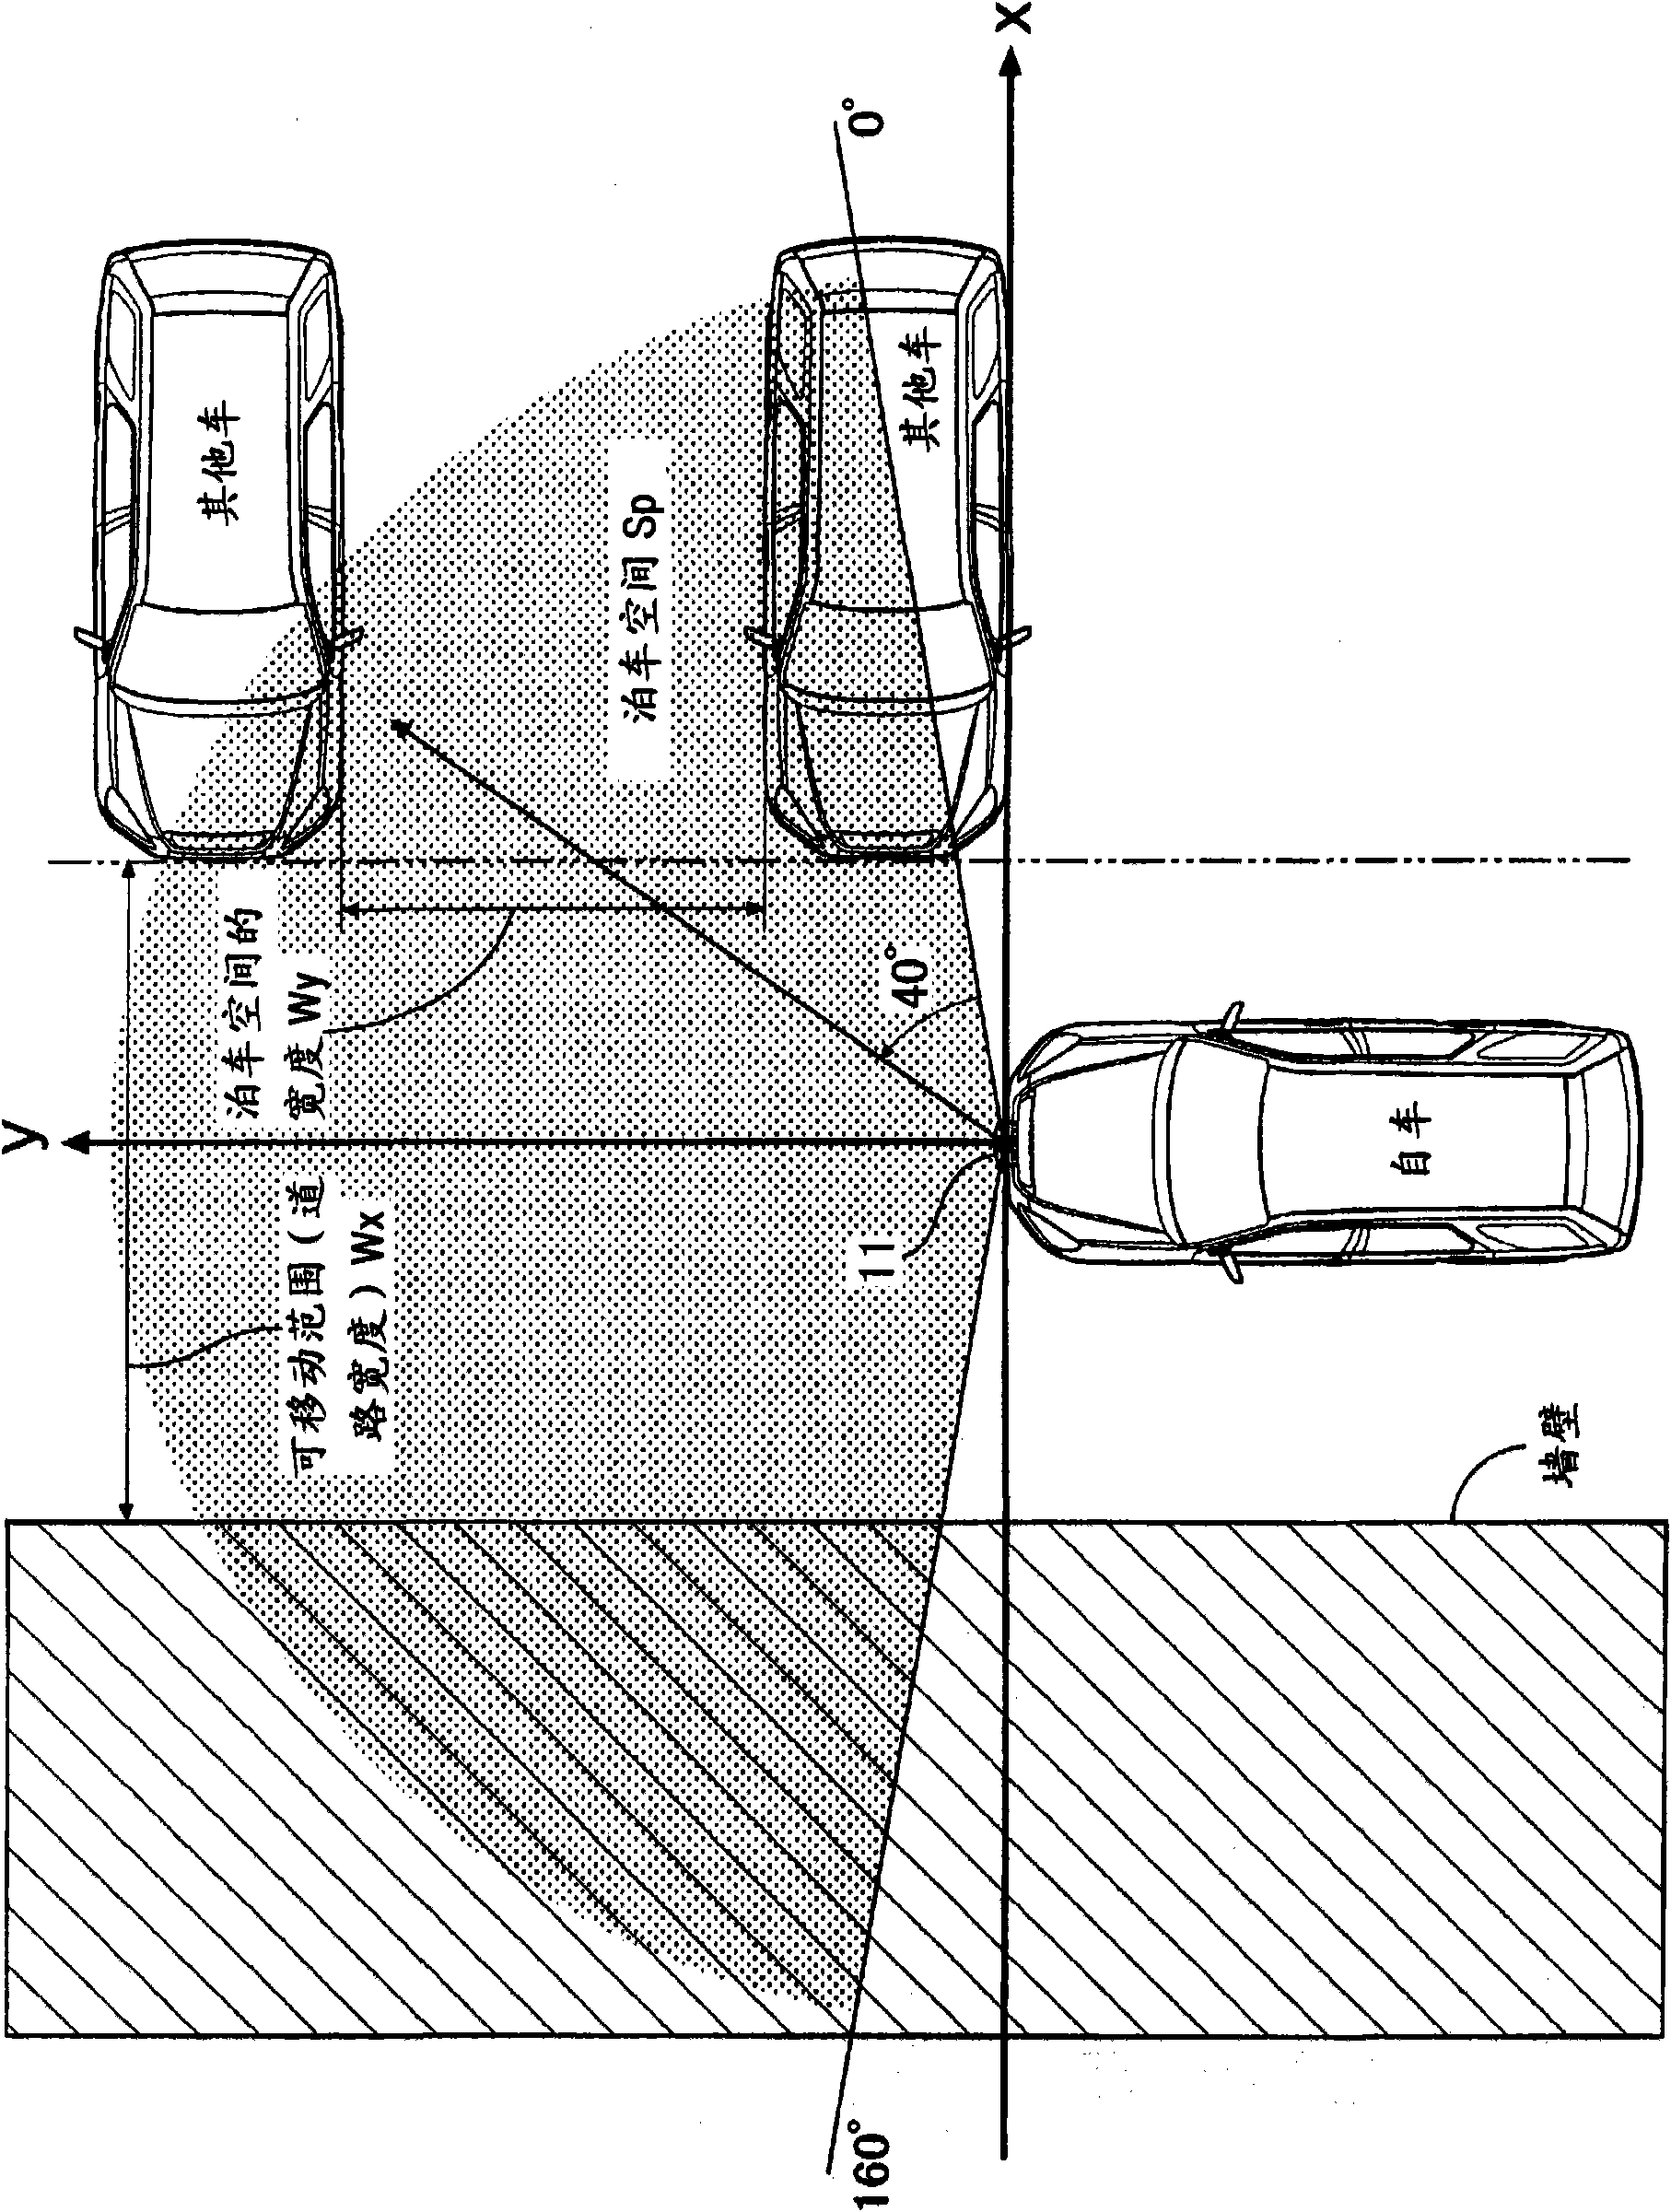 Parking availability judging device for vehicle, parking space detector for vehicle and movable range detector for vehicle